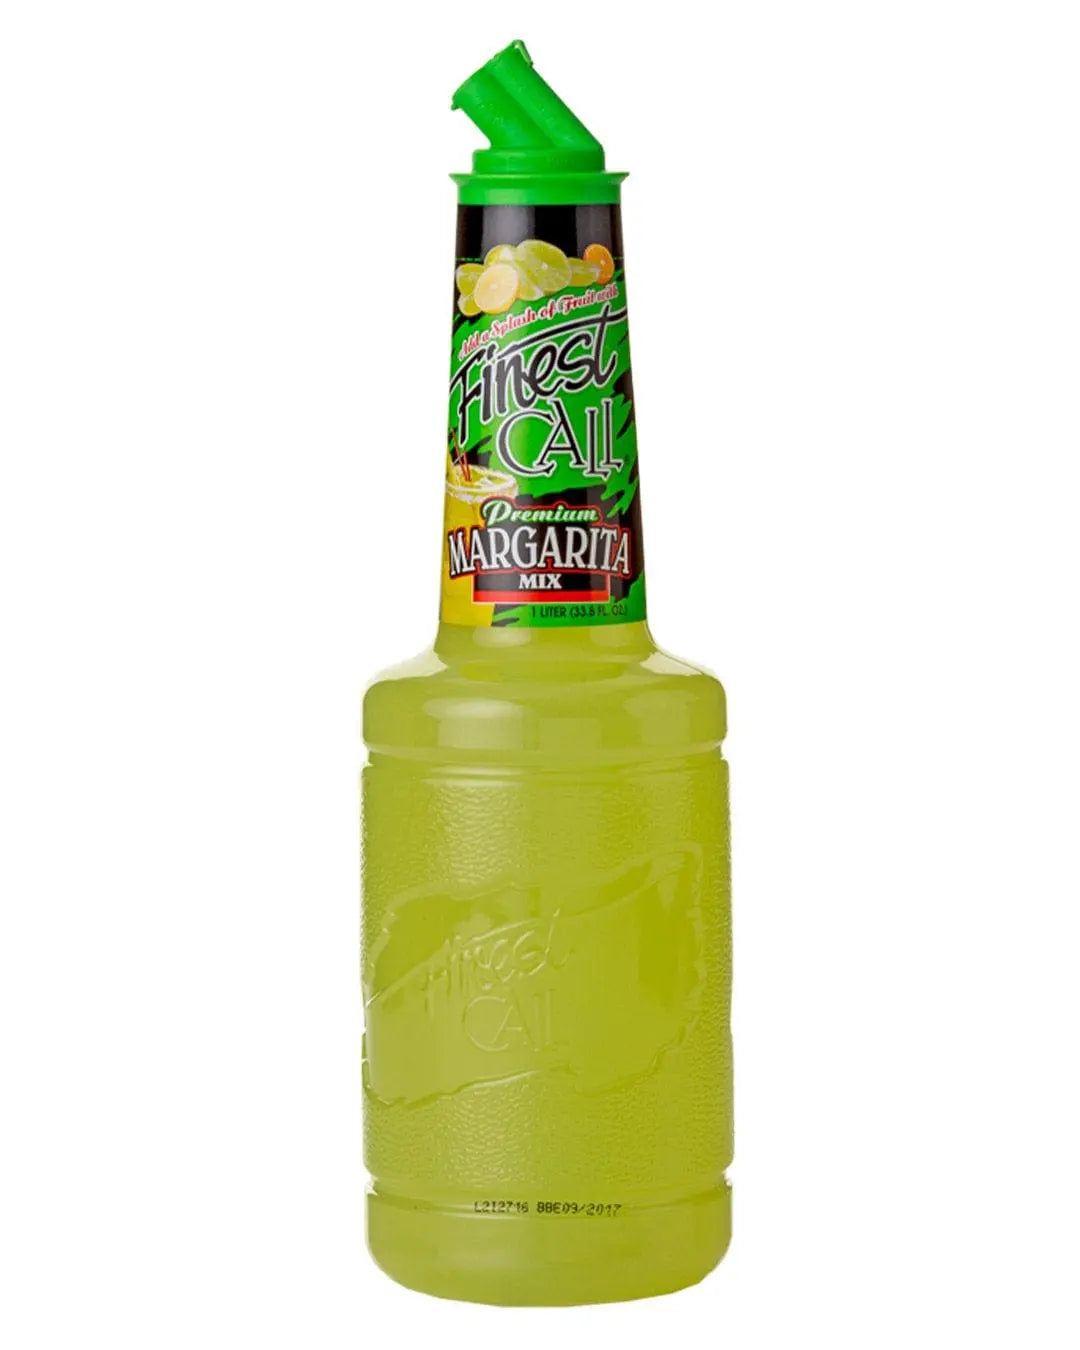 Finest Call Margarita Mix, 1 L Ready Made Cocktails